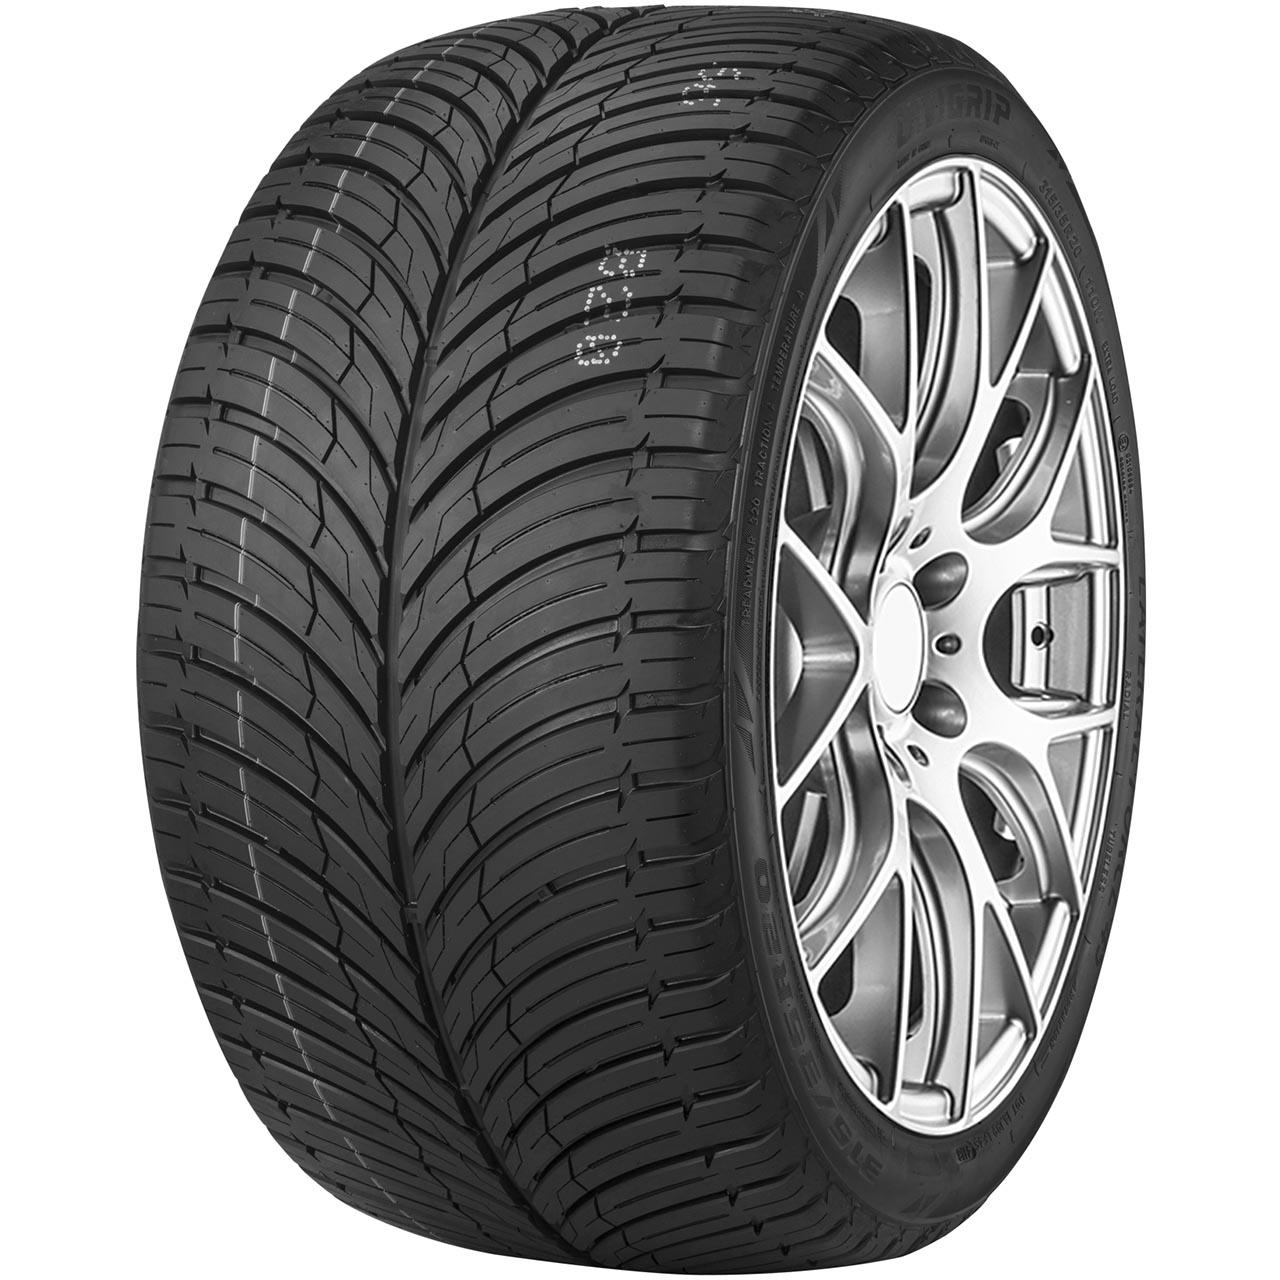 Unigrip Lateral Force 4S 245/45R20 103W XL